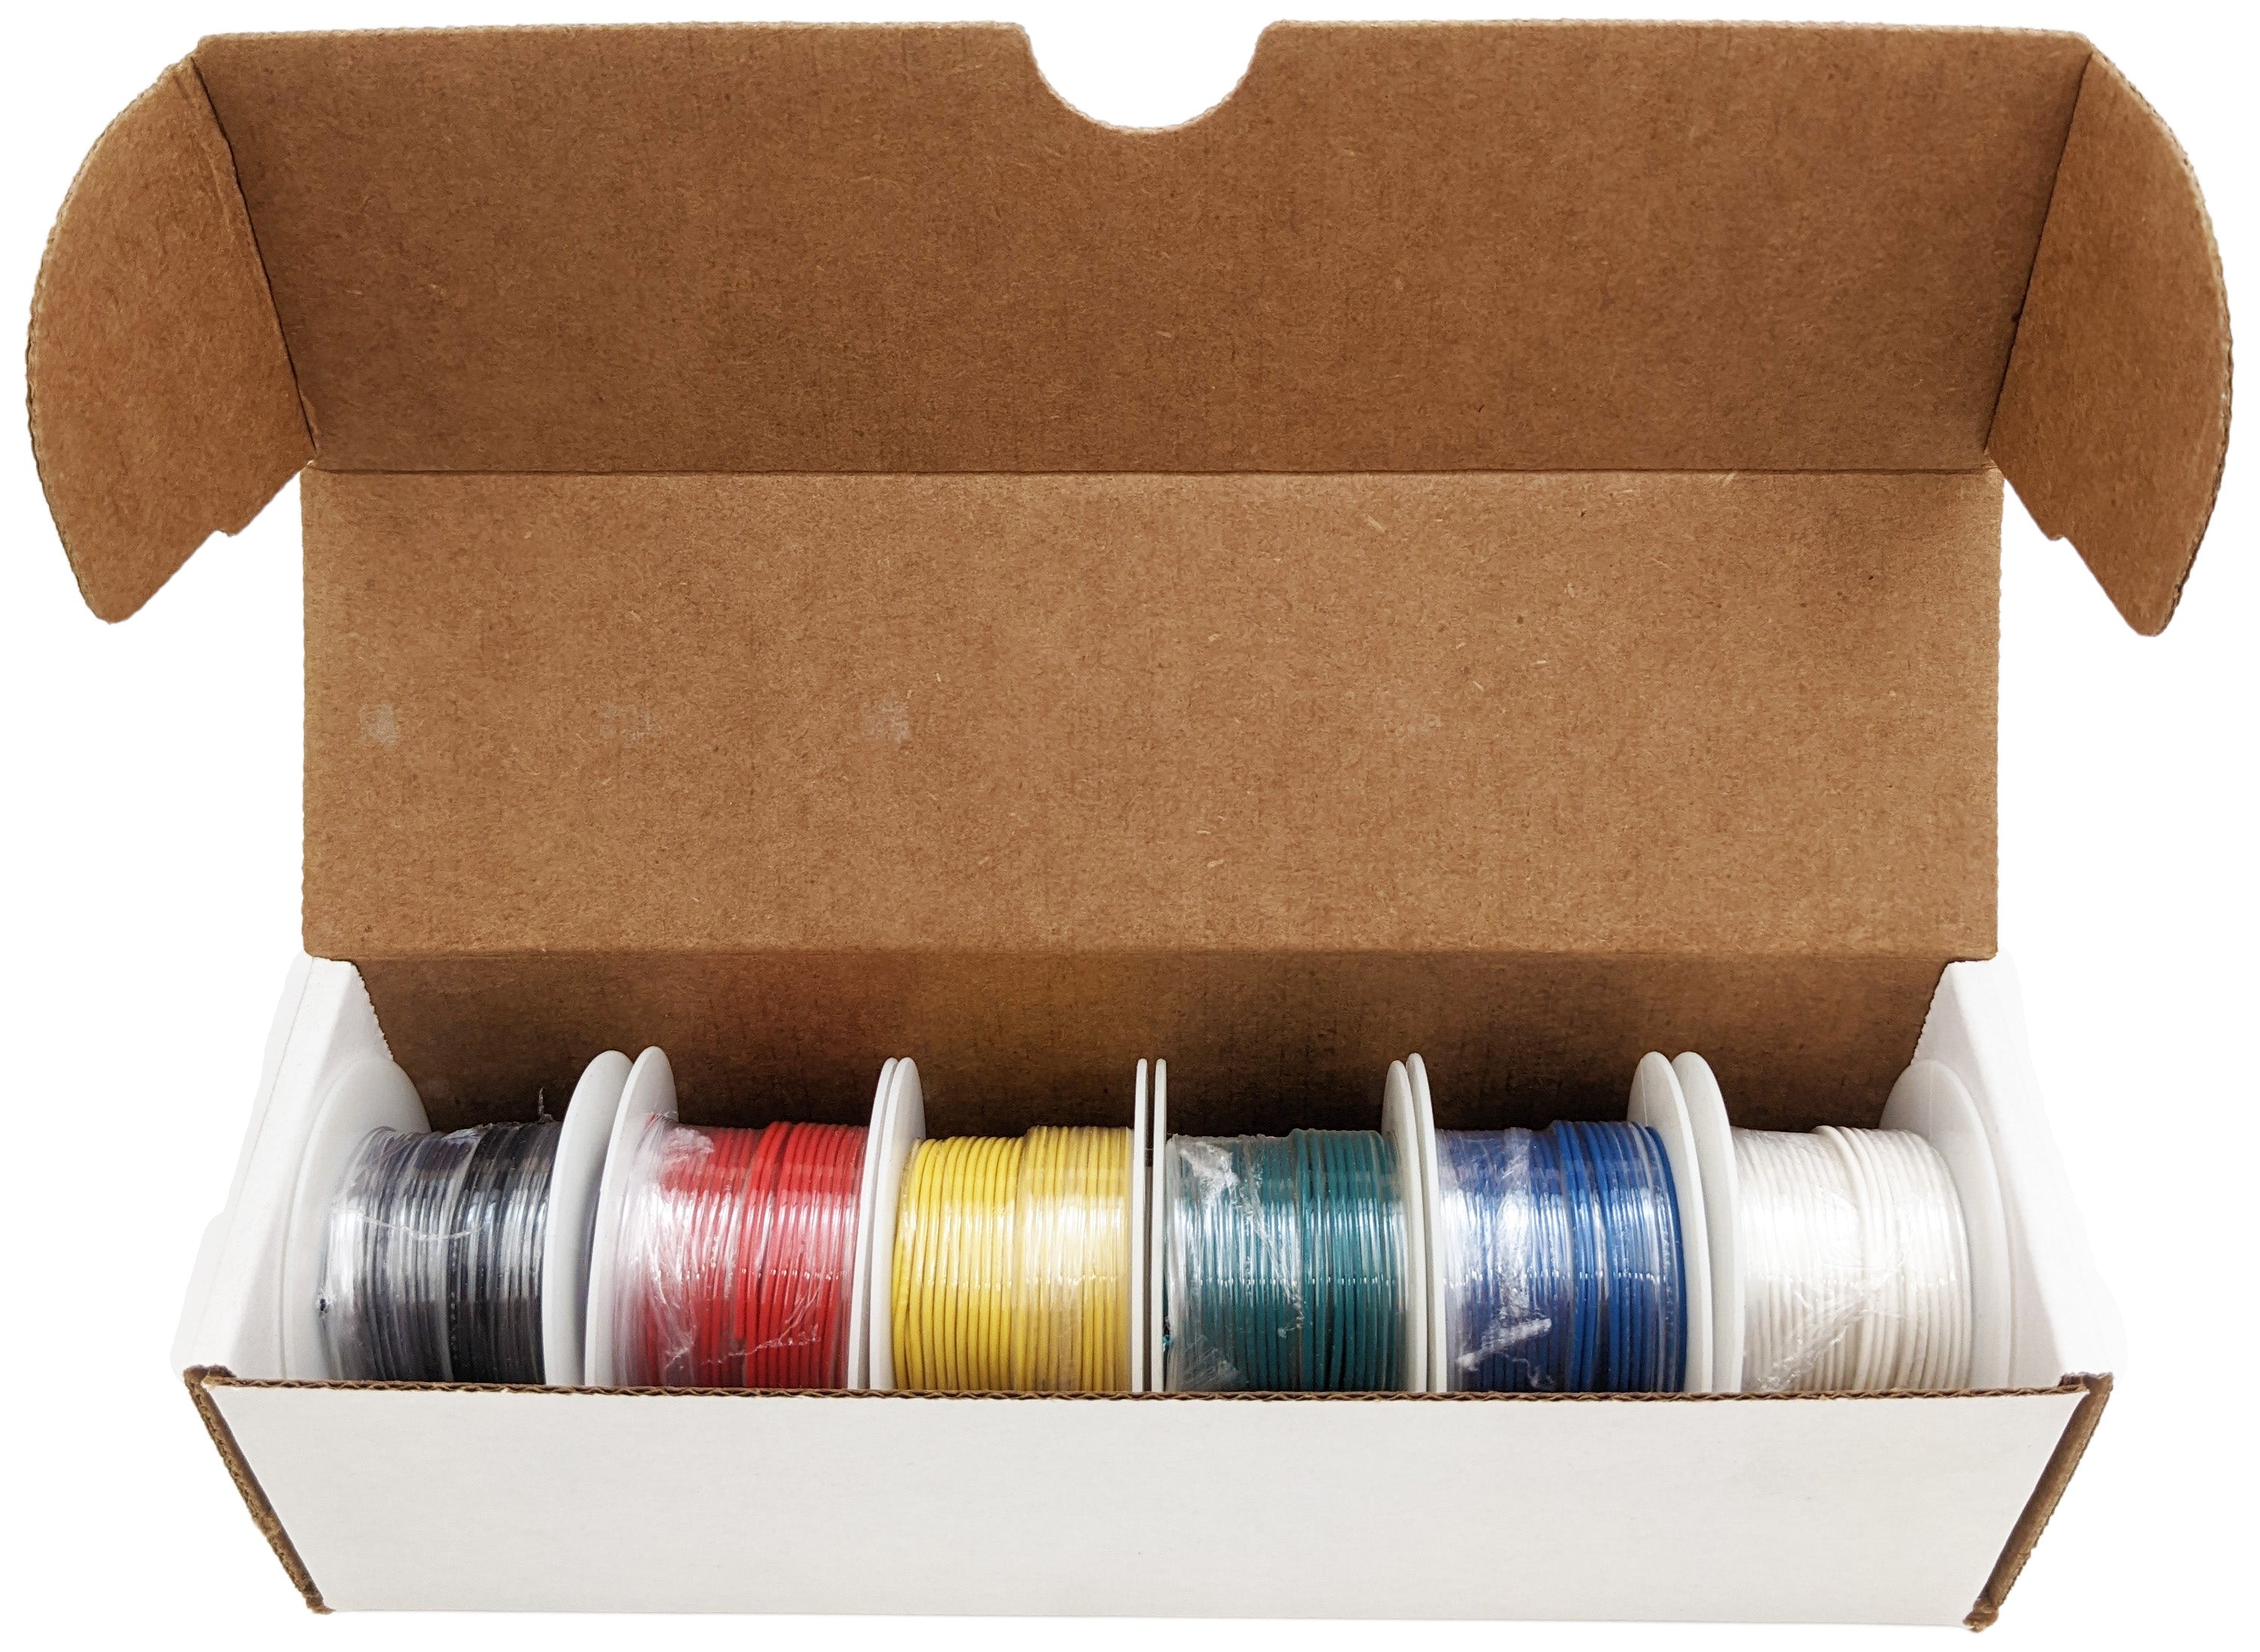 Hook-Up Wire Kit - Stranded Wire, 26 Gauge (Six 25 Foot spools)